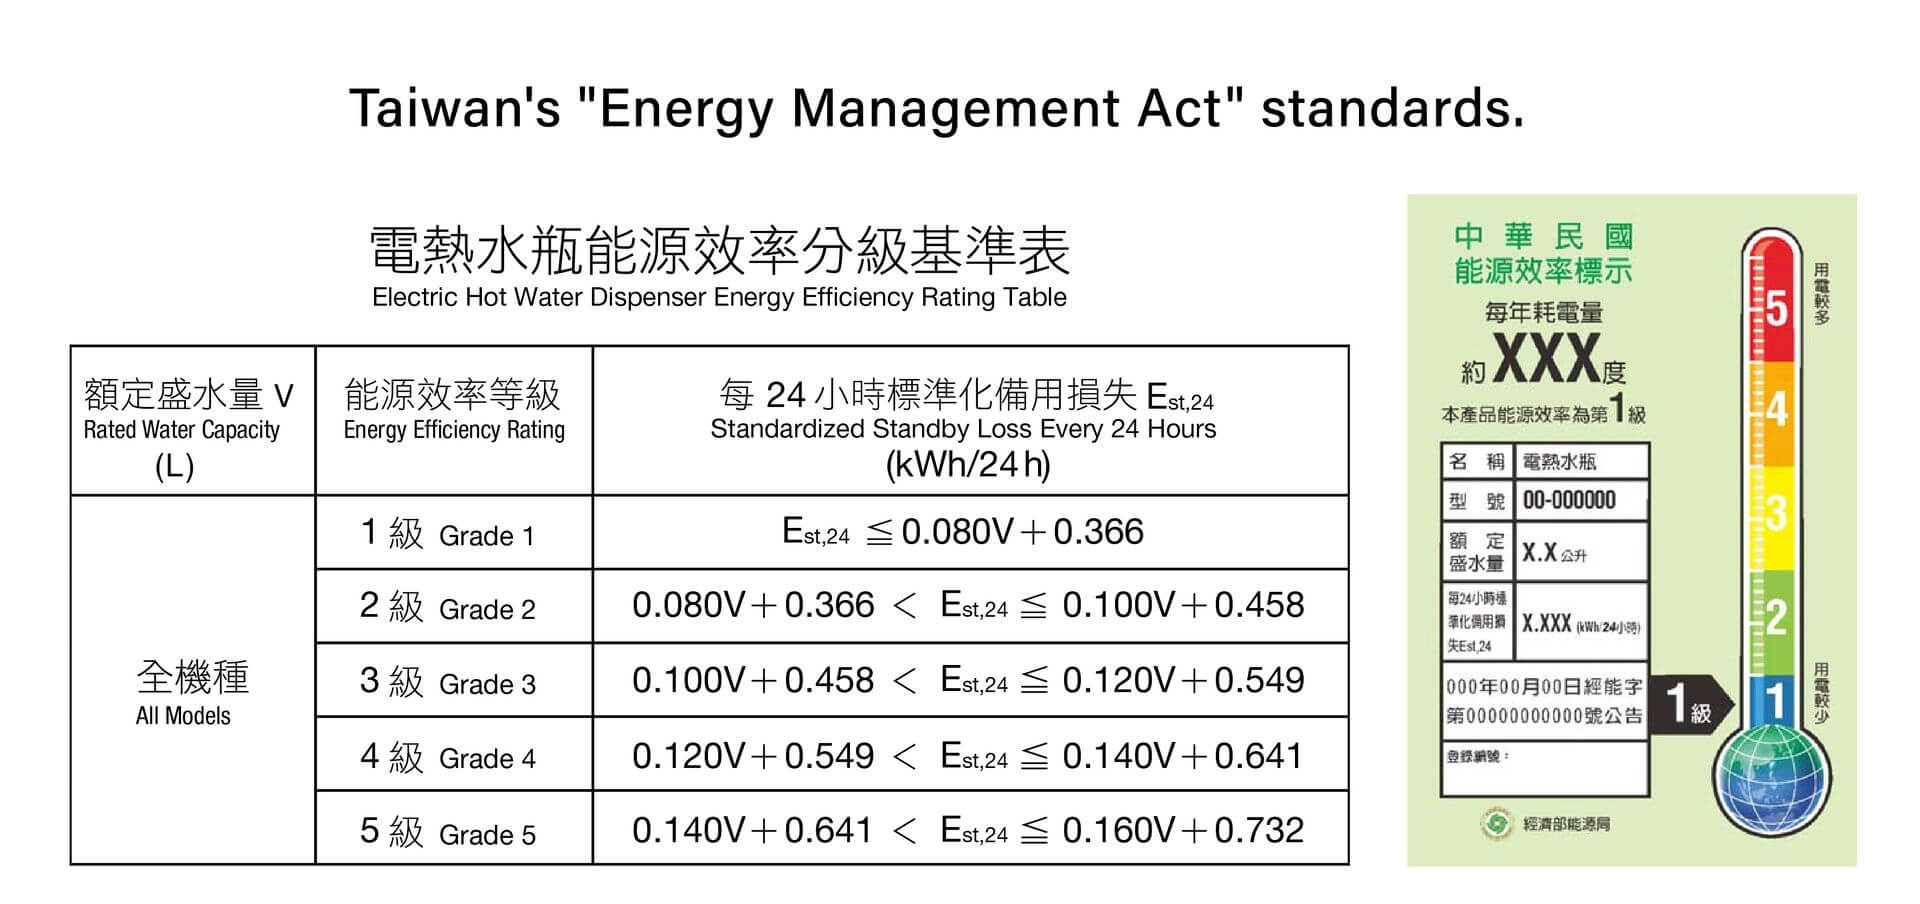 Taiwan Energy Management Act Standards